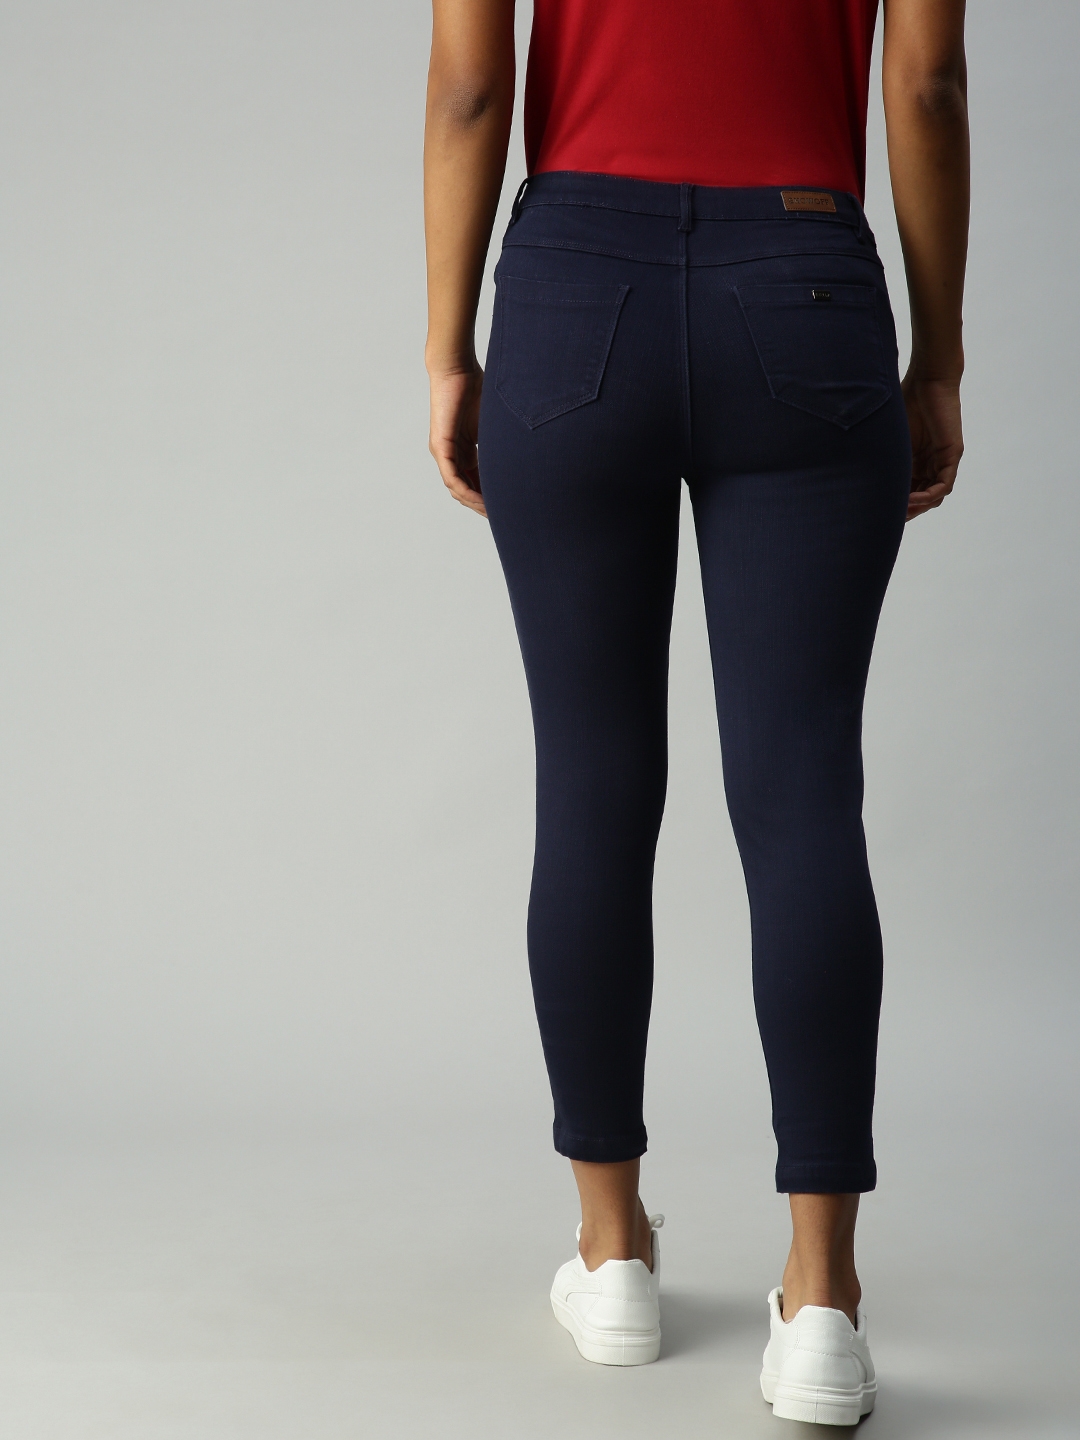 Showoff | SHOWOFF Women's Super Skinny Fit Clean Look Navy Blue Jeans 2